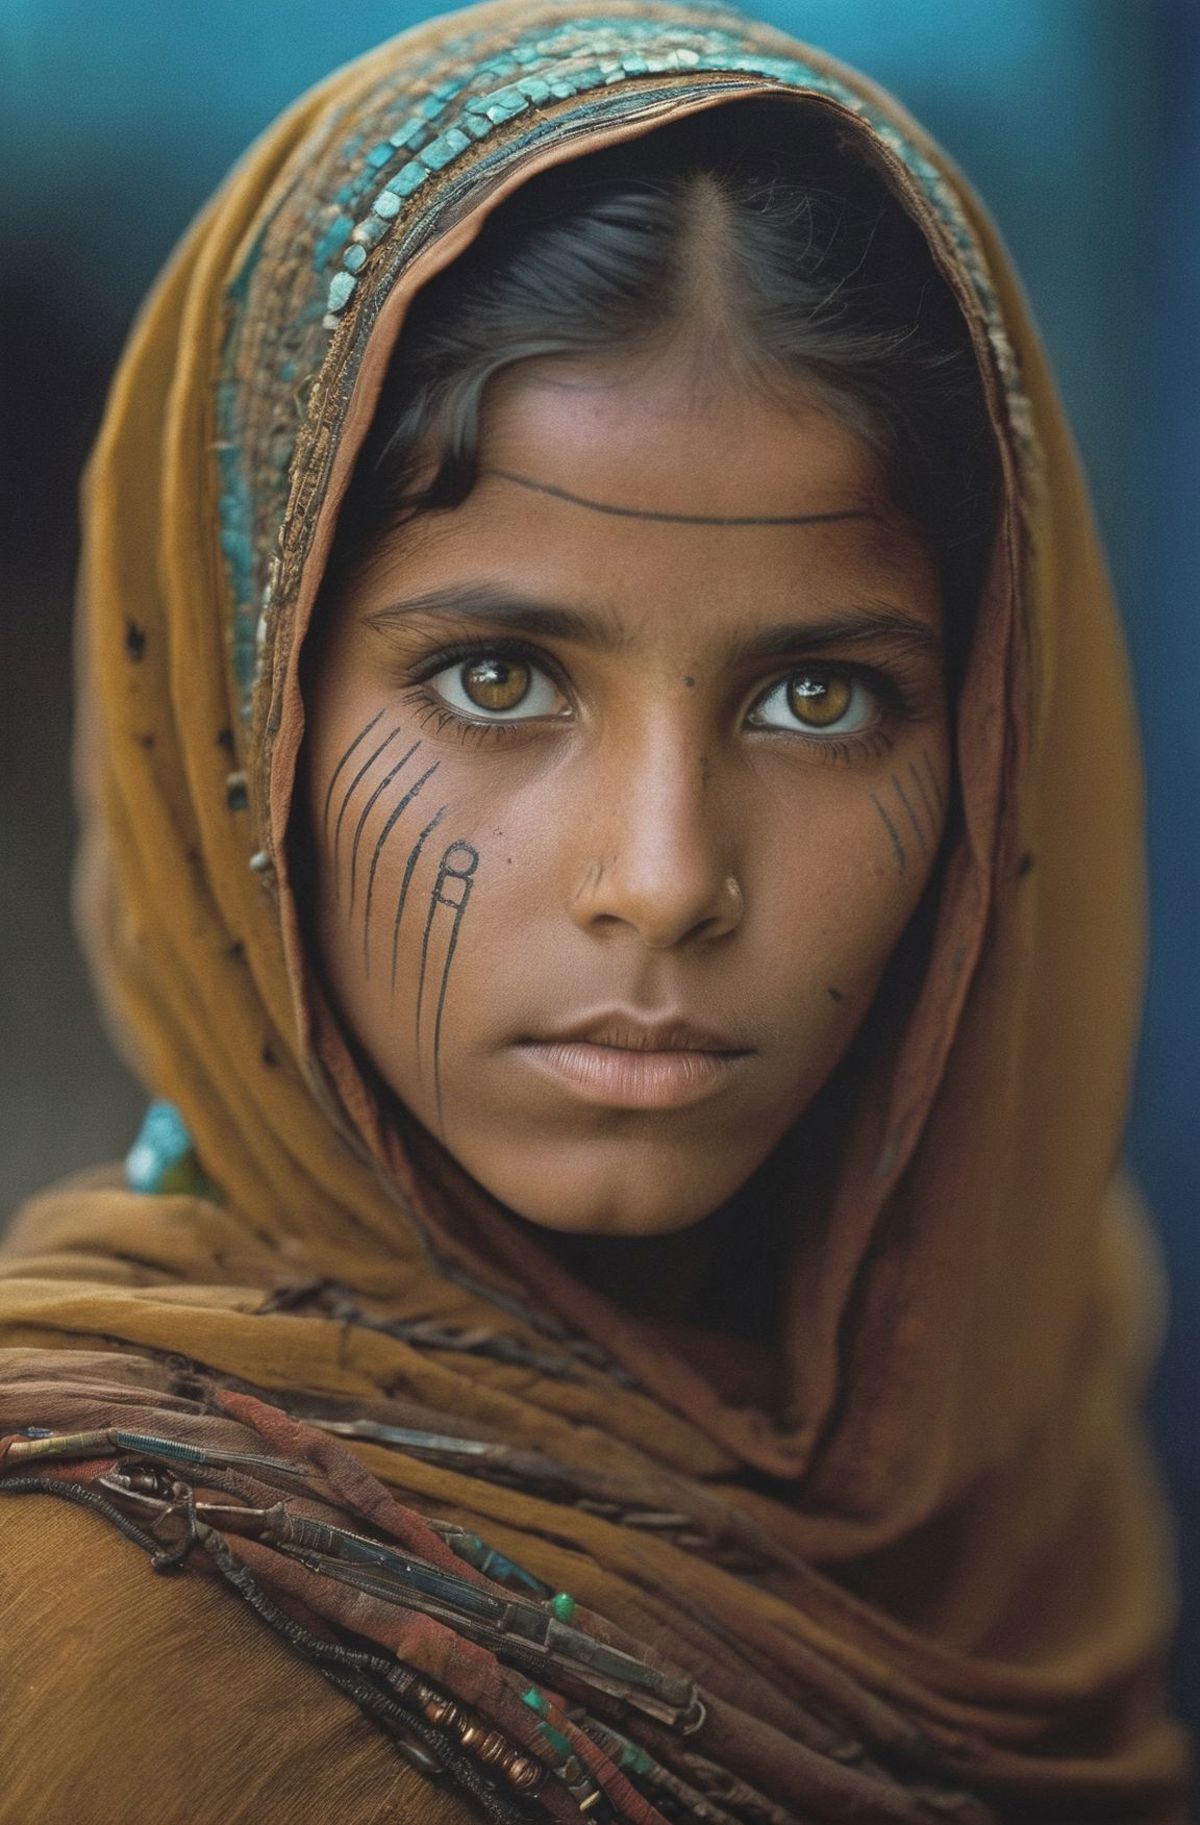 A young girl with a scar on her face and a head wrap.